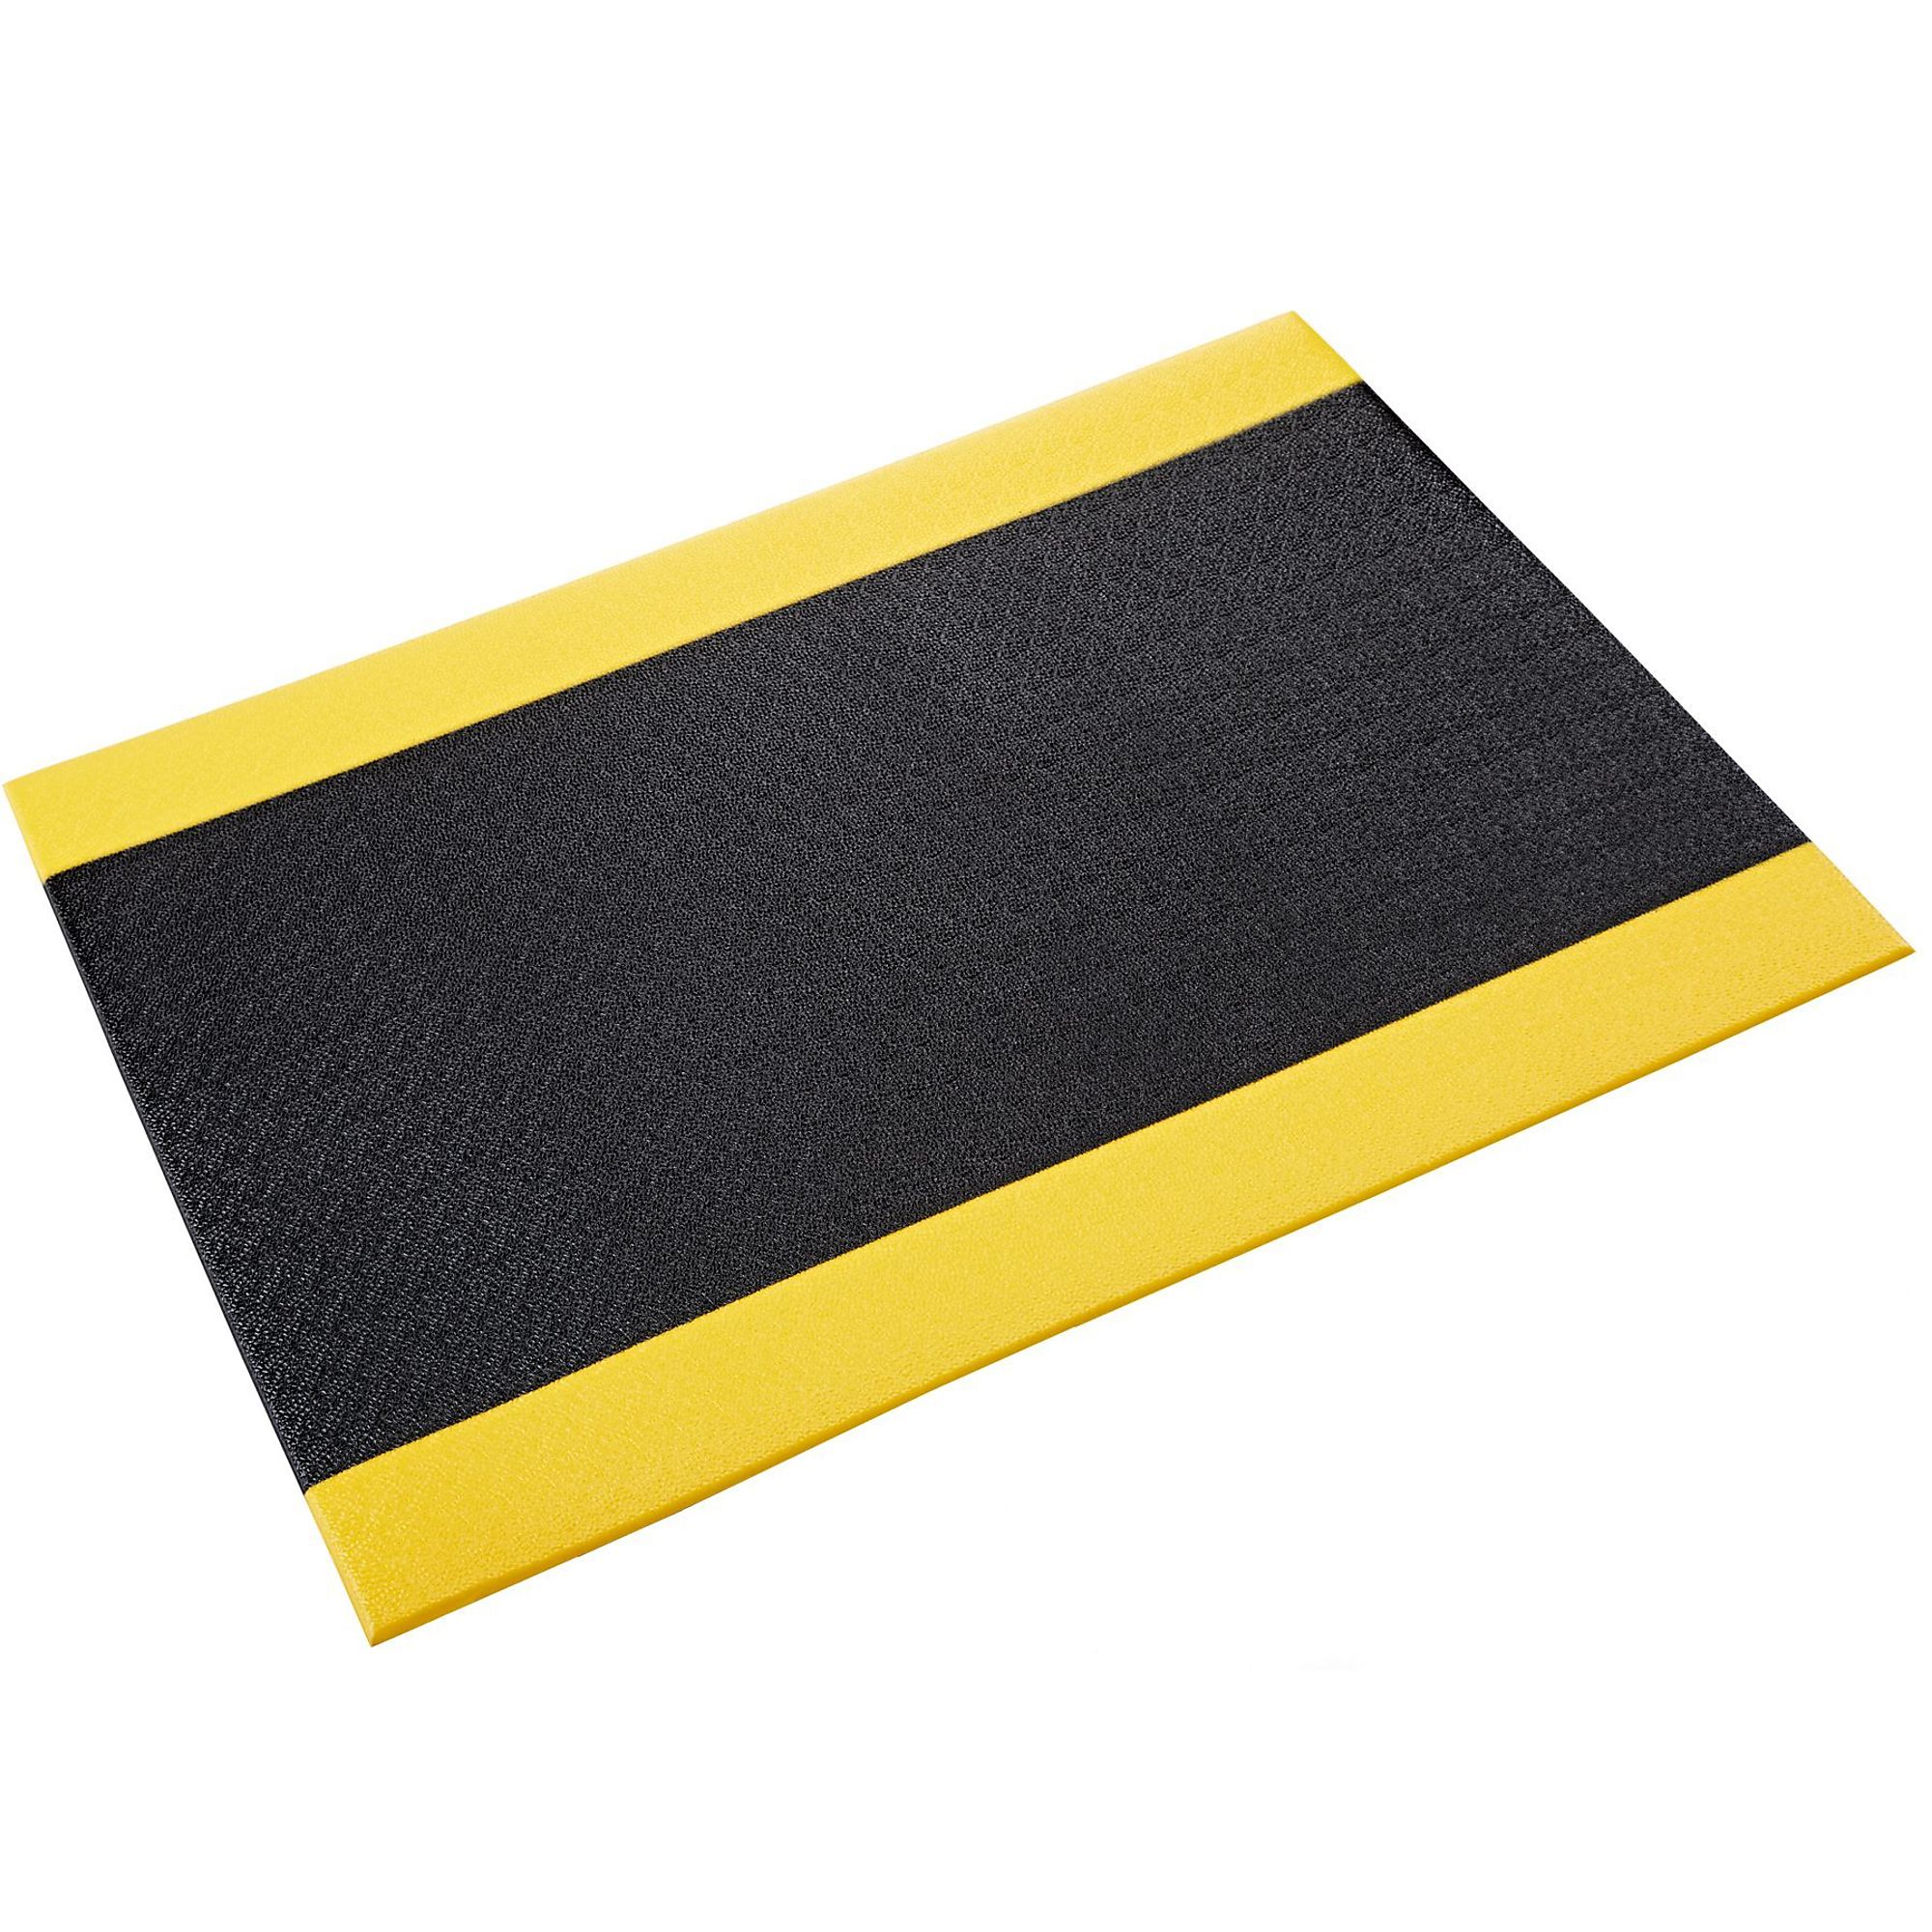 Crown Matting Technologies, Comfort-King 1/2 3ft.x12ft. Black w/Yellow, Width 36 in, Length 144 in, Thickness 1/2 in, Model K4 0312YB